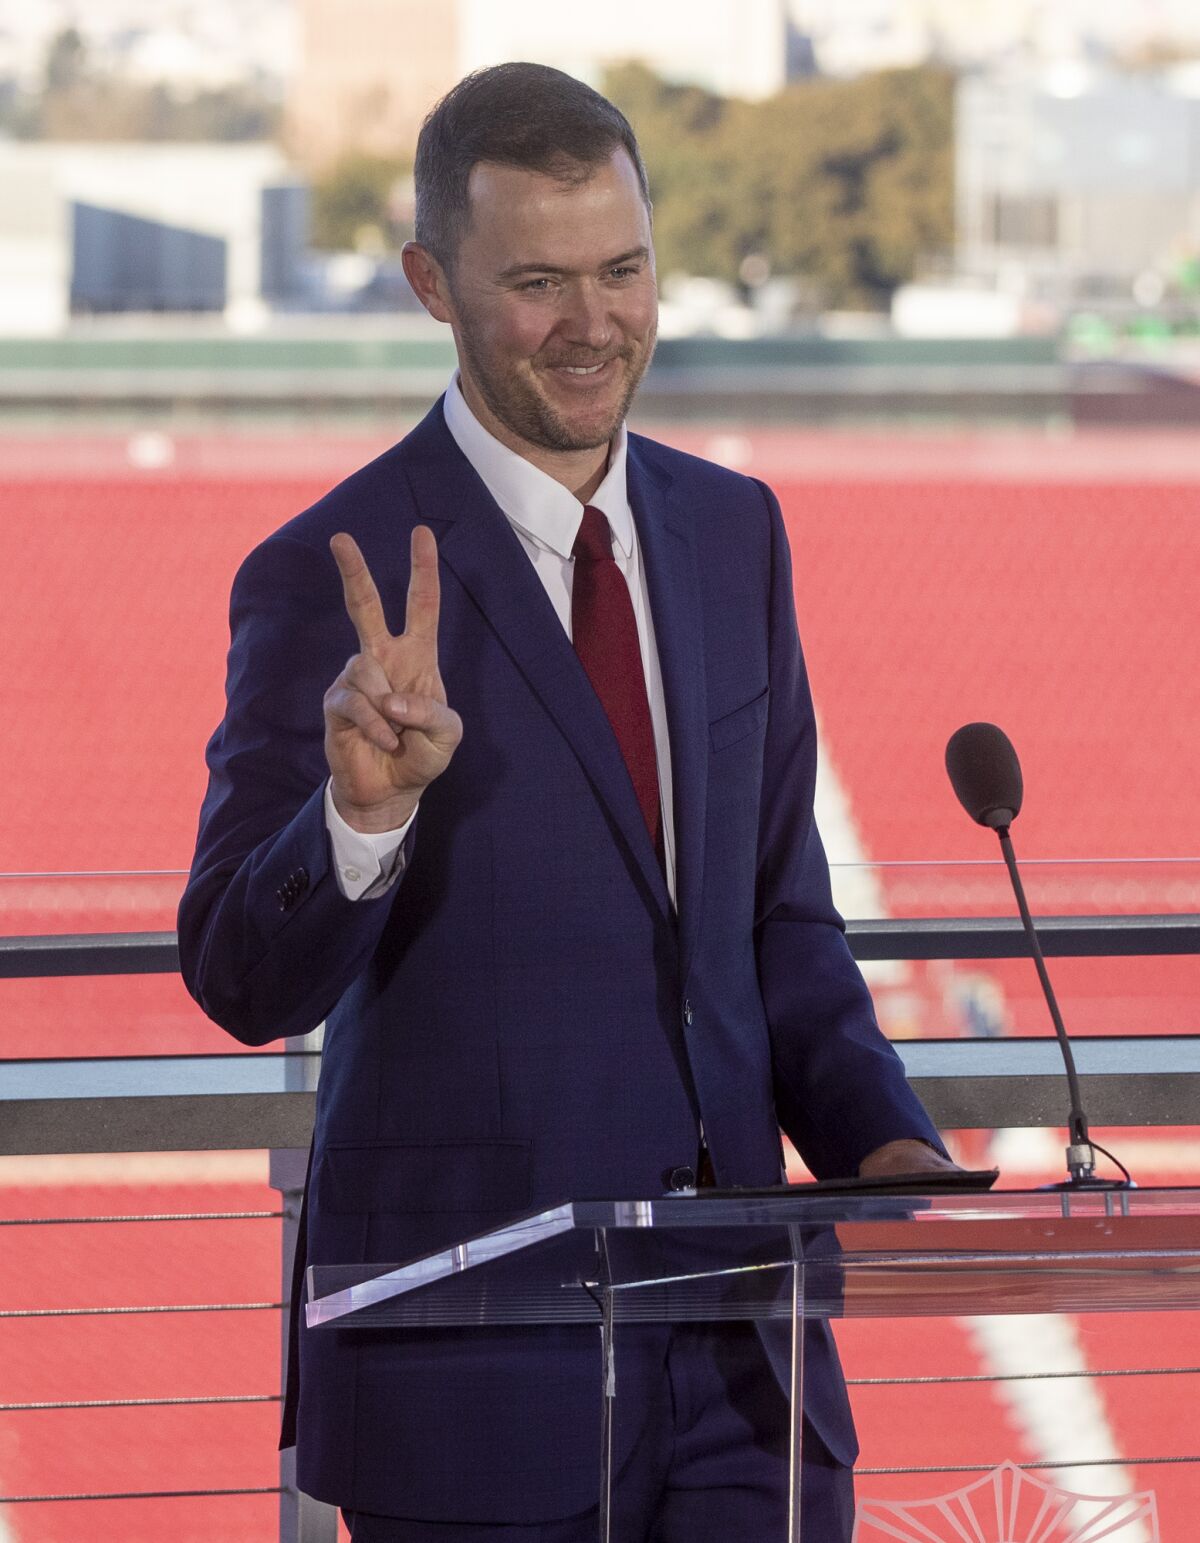 Lincoln Riley is introduced as the head coach of USC football during a news conference at the Coliseum on Monday.